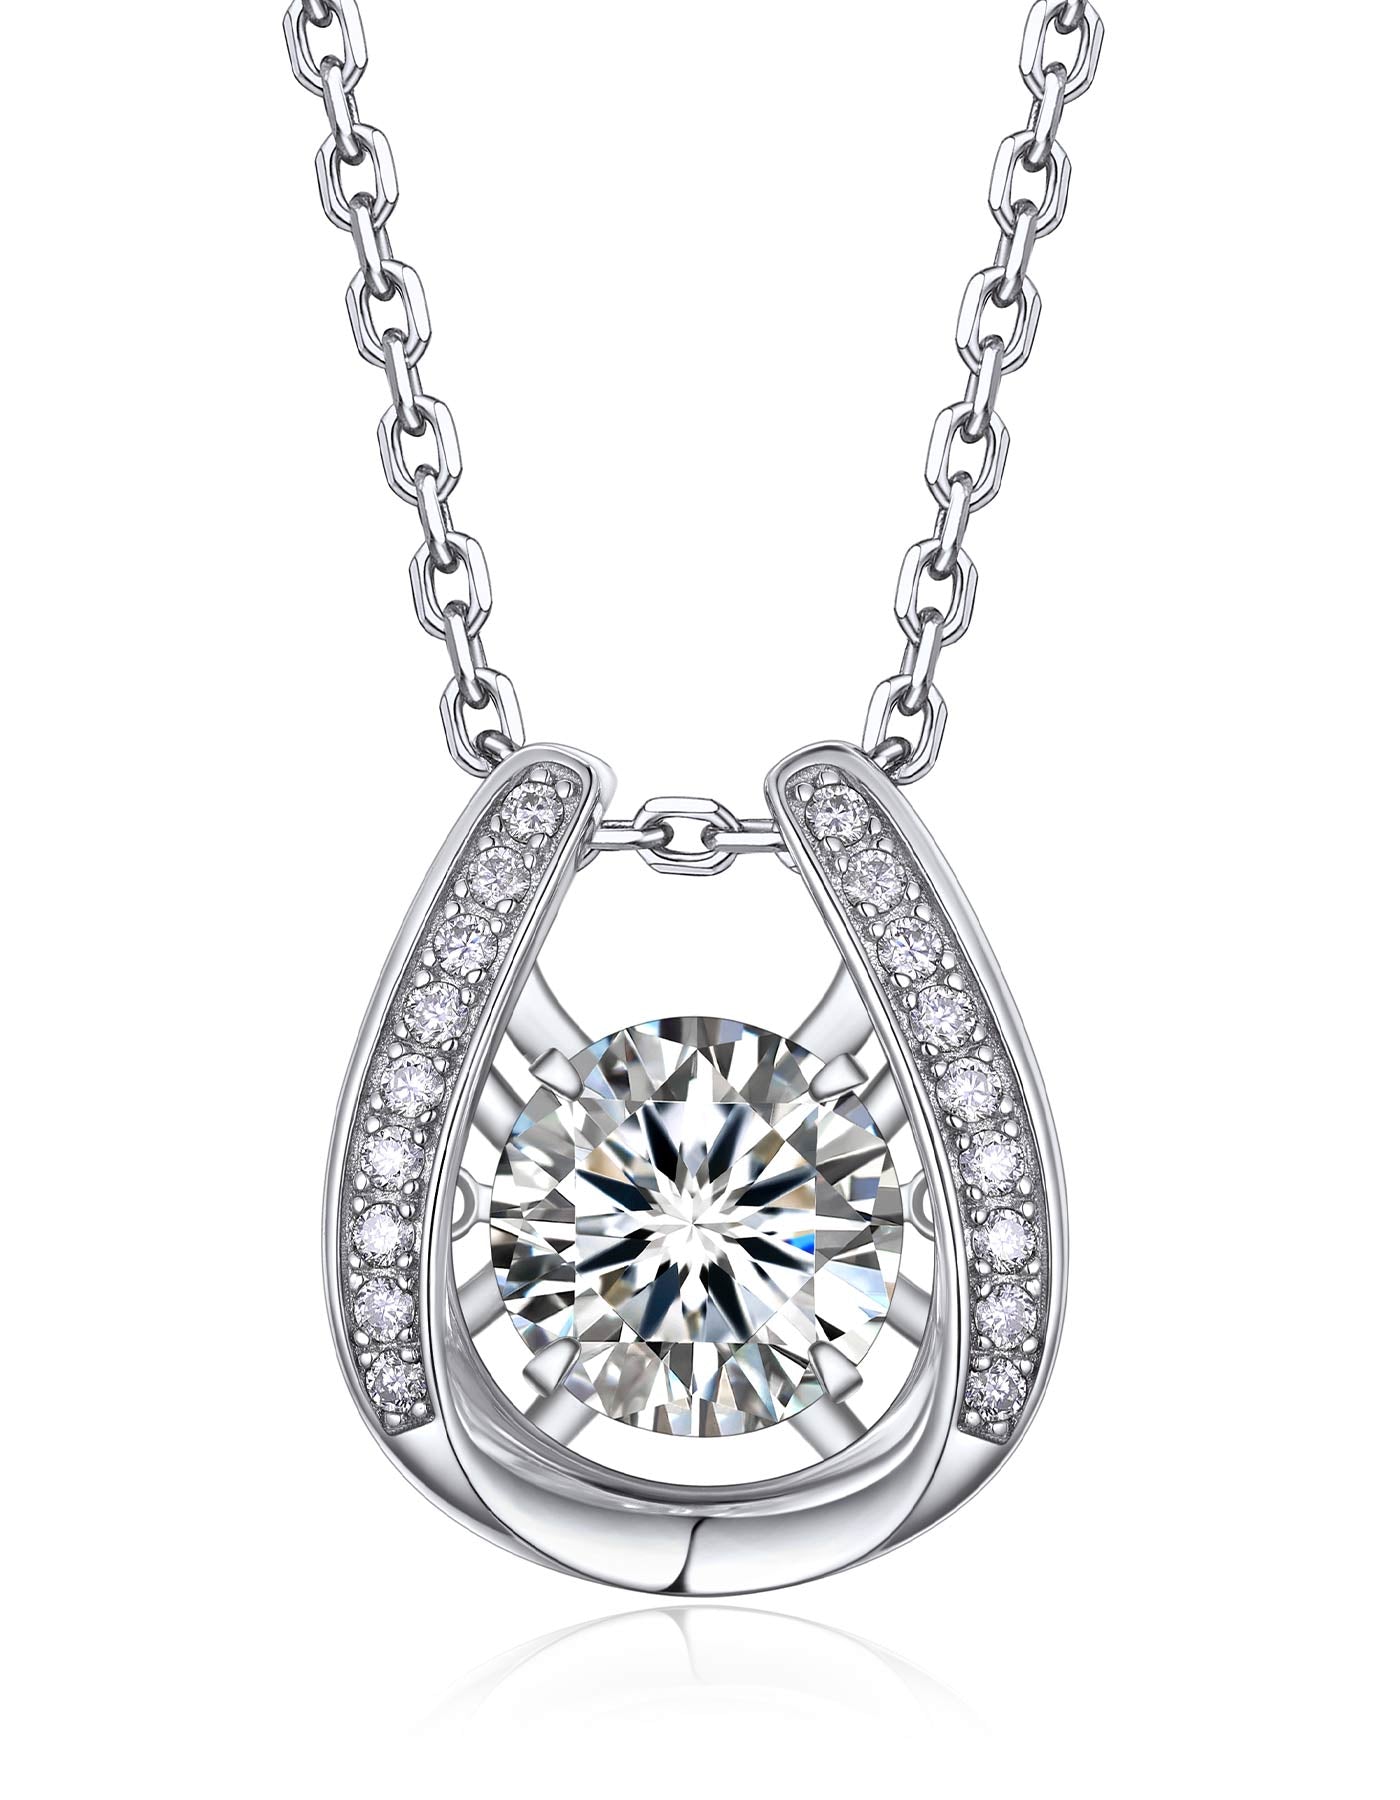 29 Best Diamond necklace designs and tips